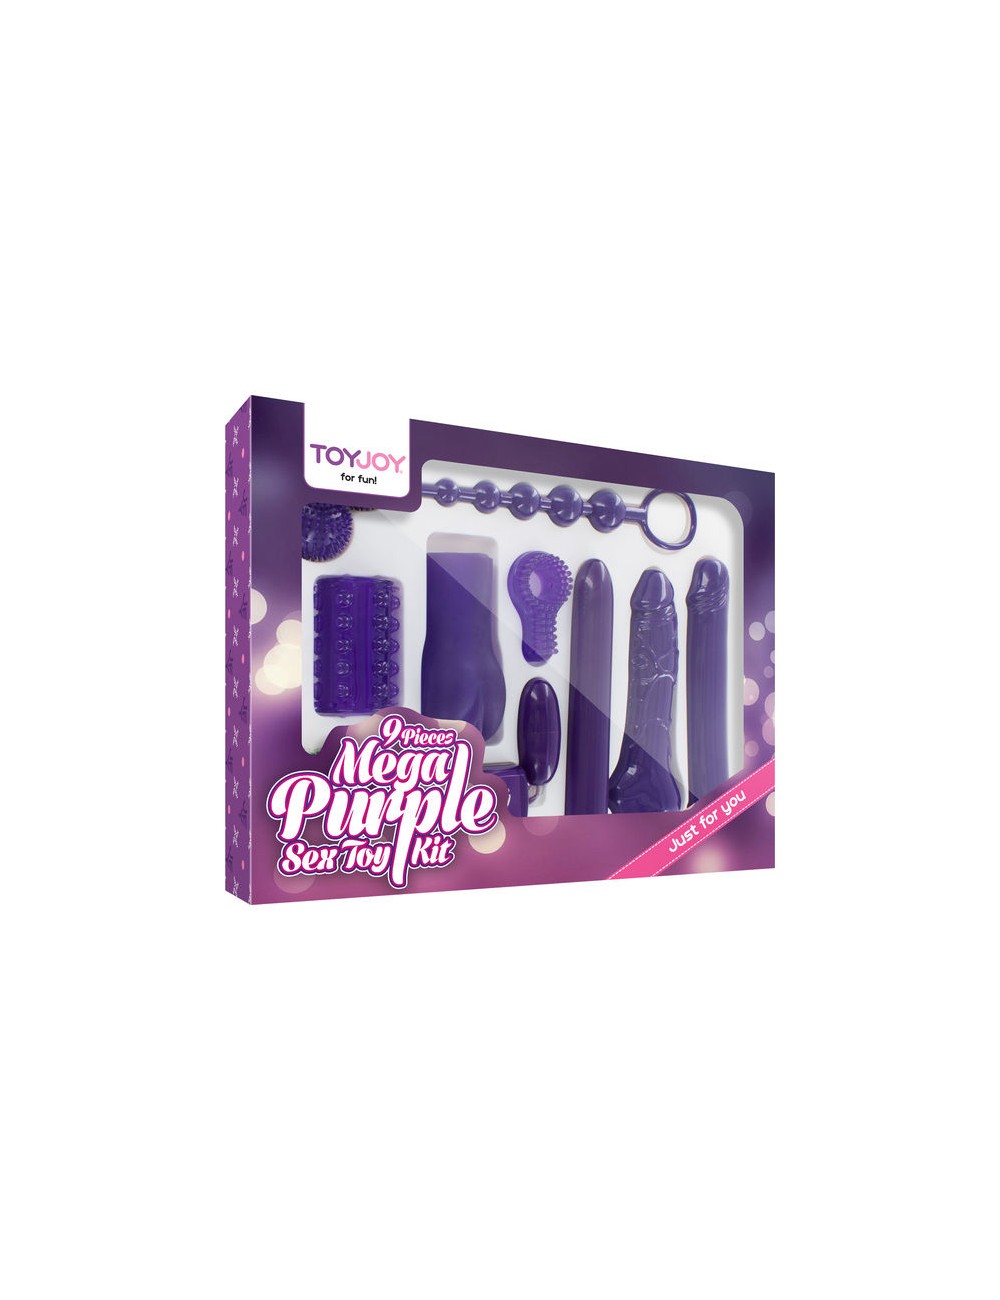 JUST FOR YOU MEGA PURPLE SEX TOY KIT